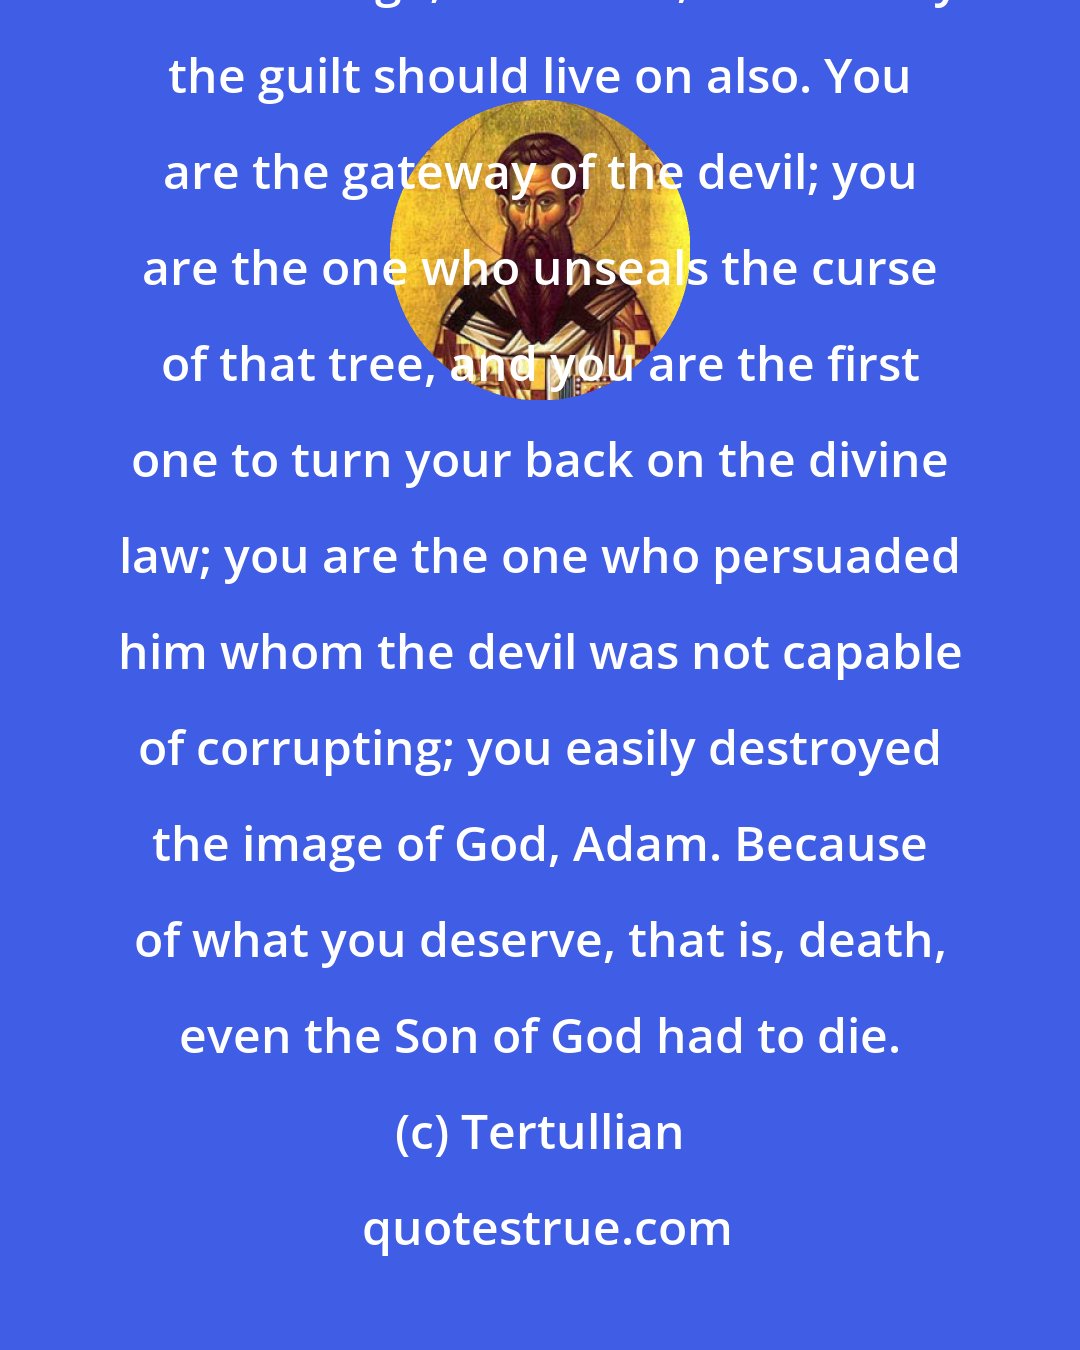 Tertullian: Do you not know that you are Eve? The judgment of God upon this sex lives on in this age; therefore, necessarily the guilt should live on also. You are the gateway of the devil; you are the one who unseals the curse of that tree, and you are the first one to turn your back on the divine law; you are the one who persuaded him whom the devil was not capable of corrupting; you easily destroyed the image of God, Adam. Because of what you deserve, that is, death, even the Son of God had to die.